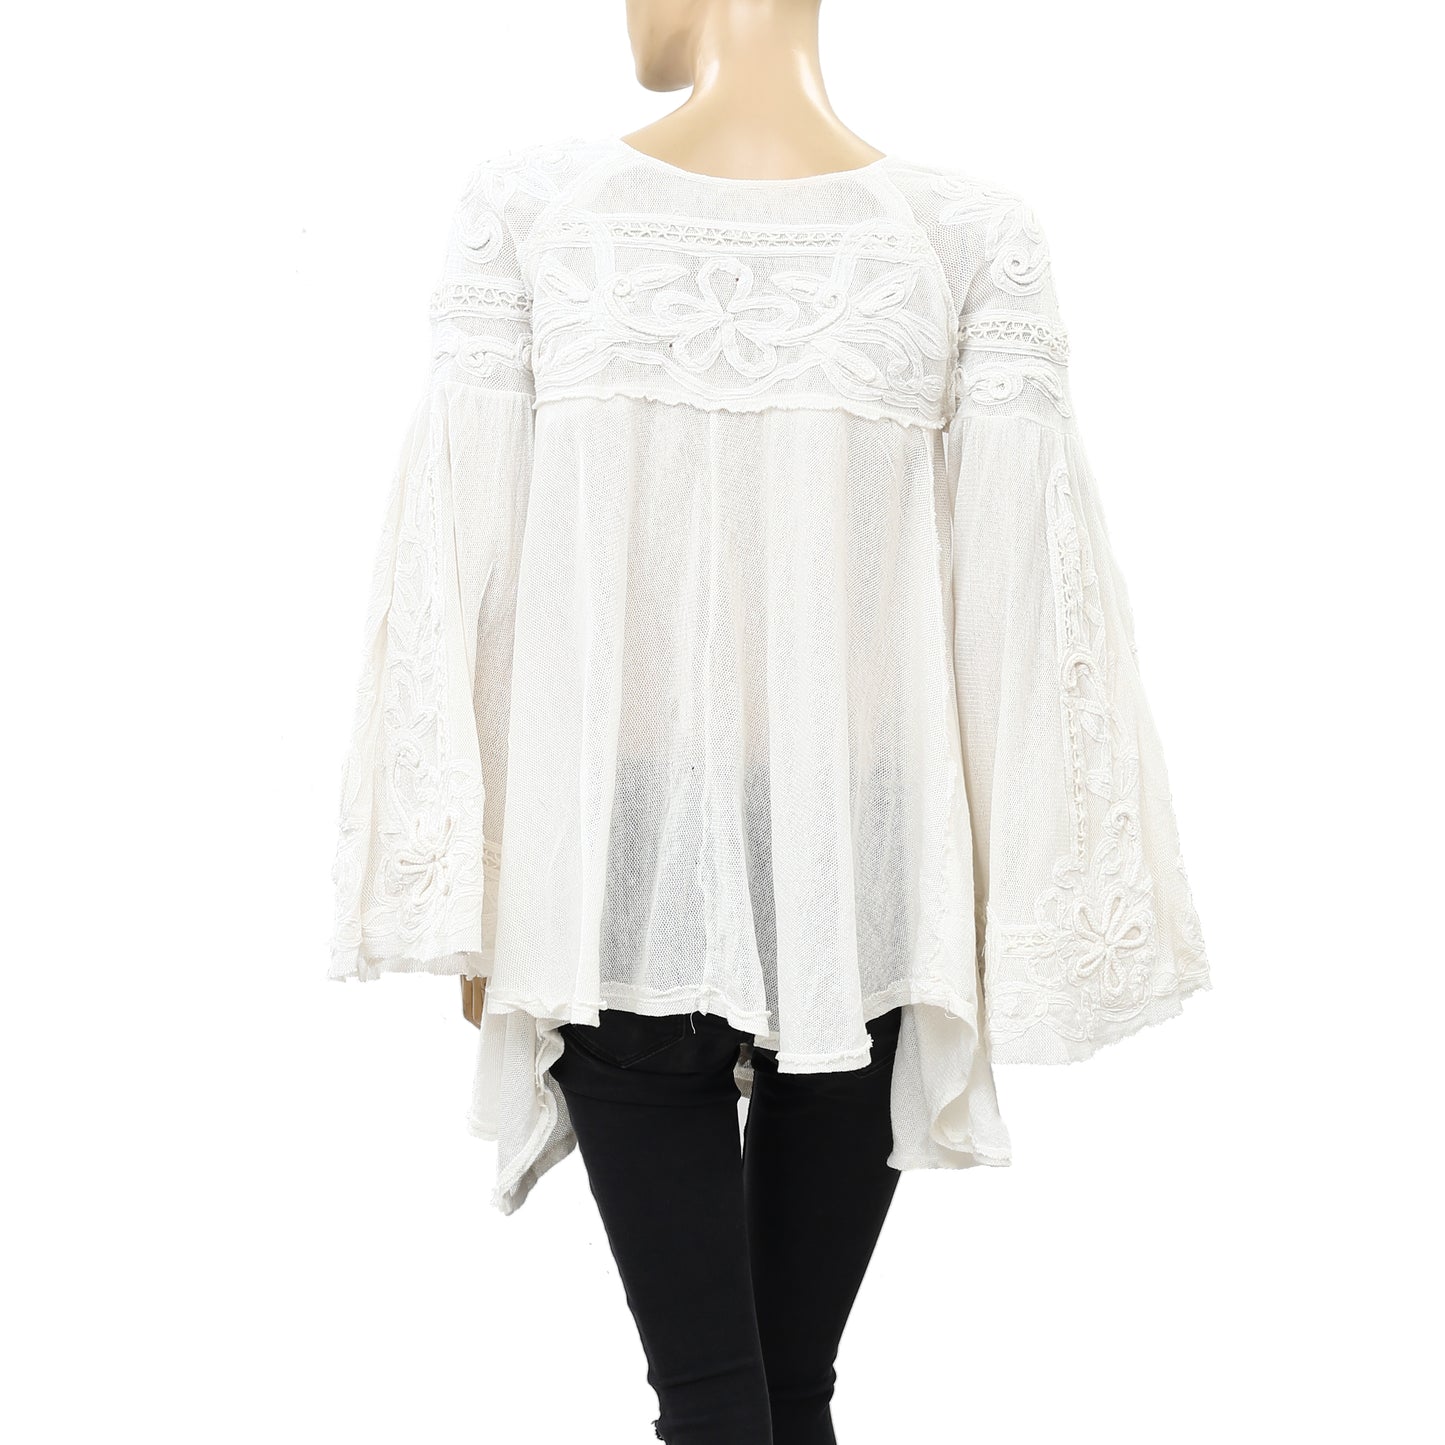 Free People Floral Embroidered Crochet Tunic Top